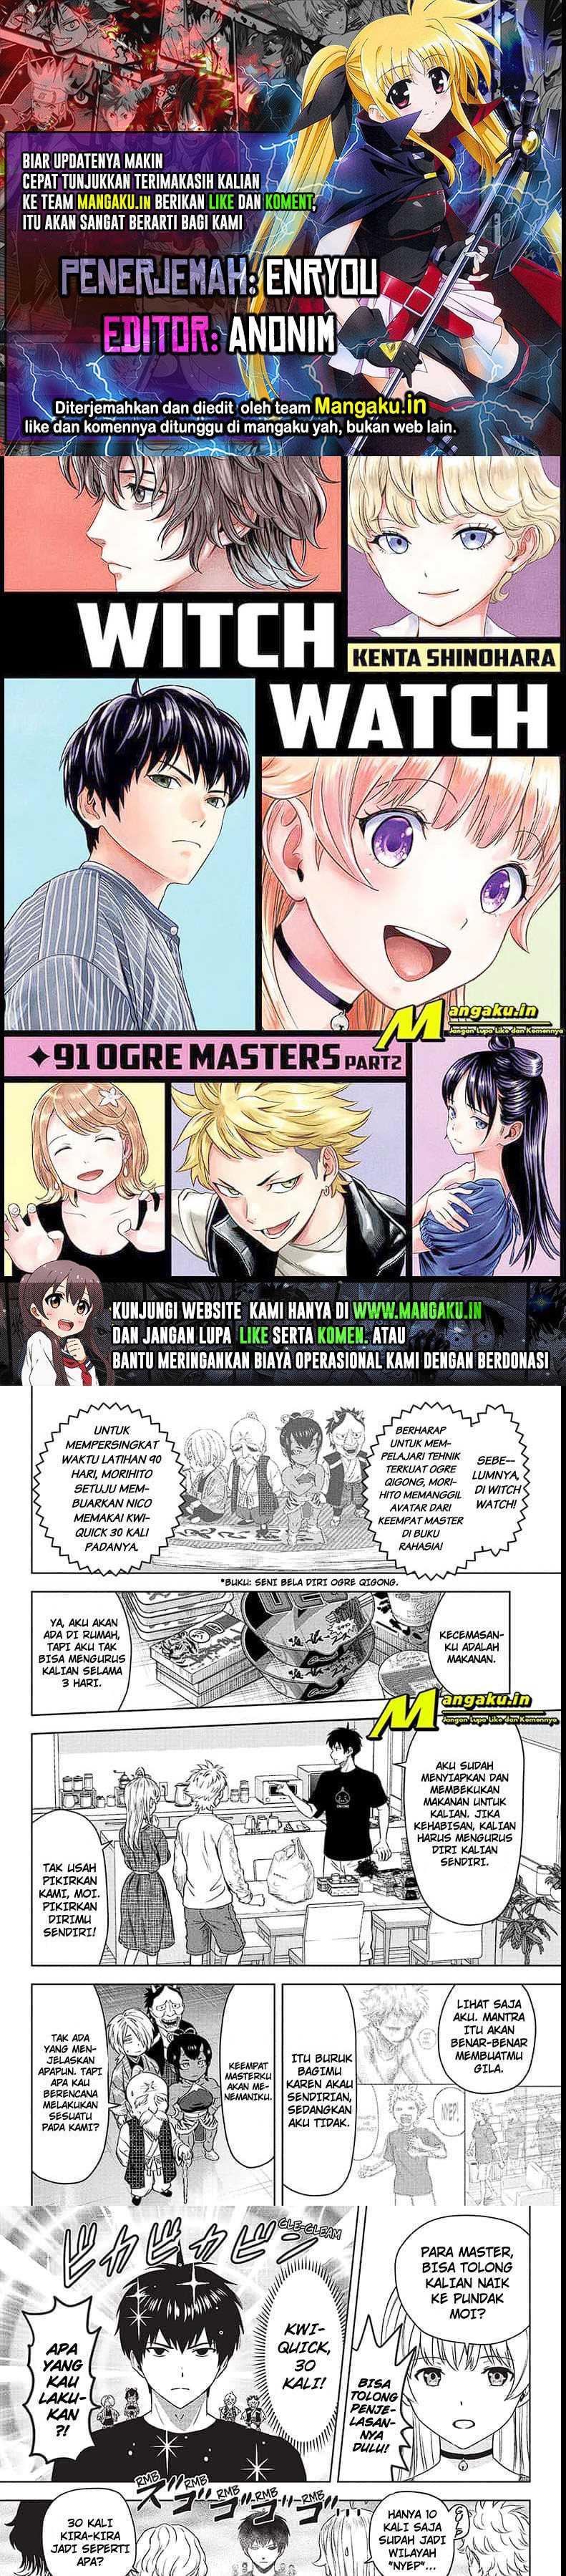 Witch Watch Chapter 91